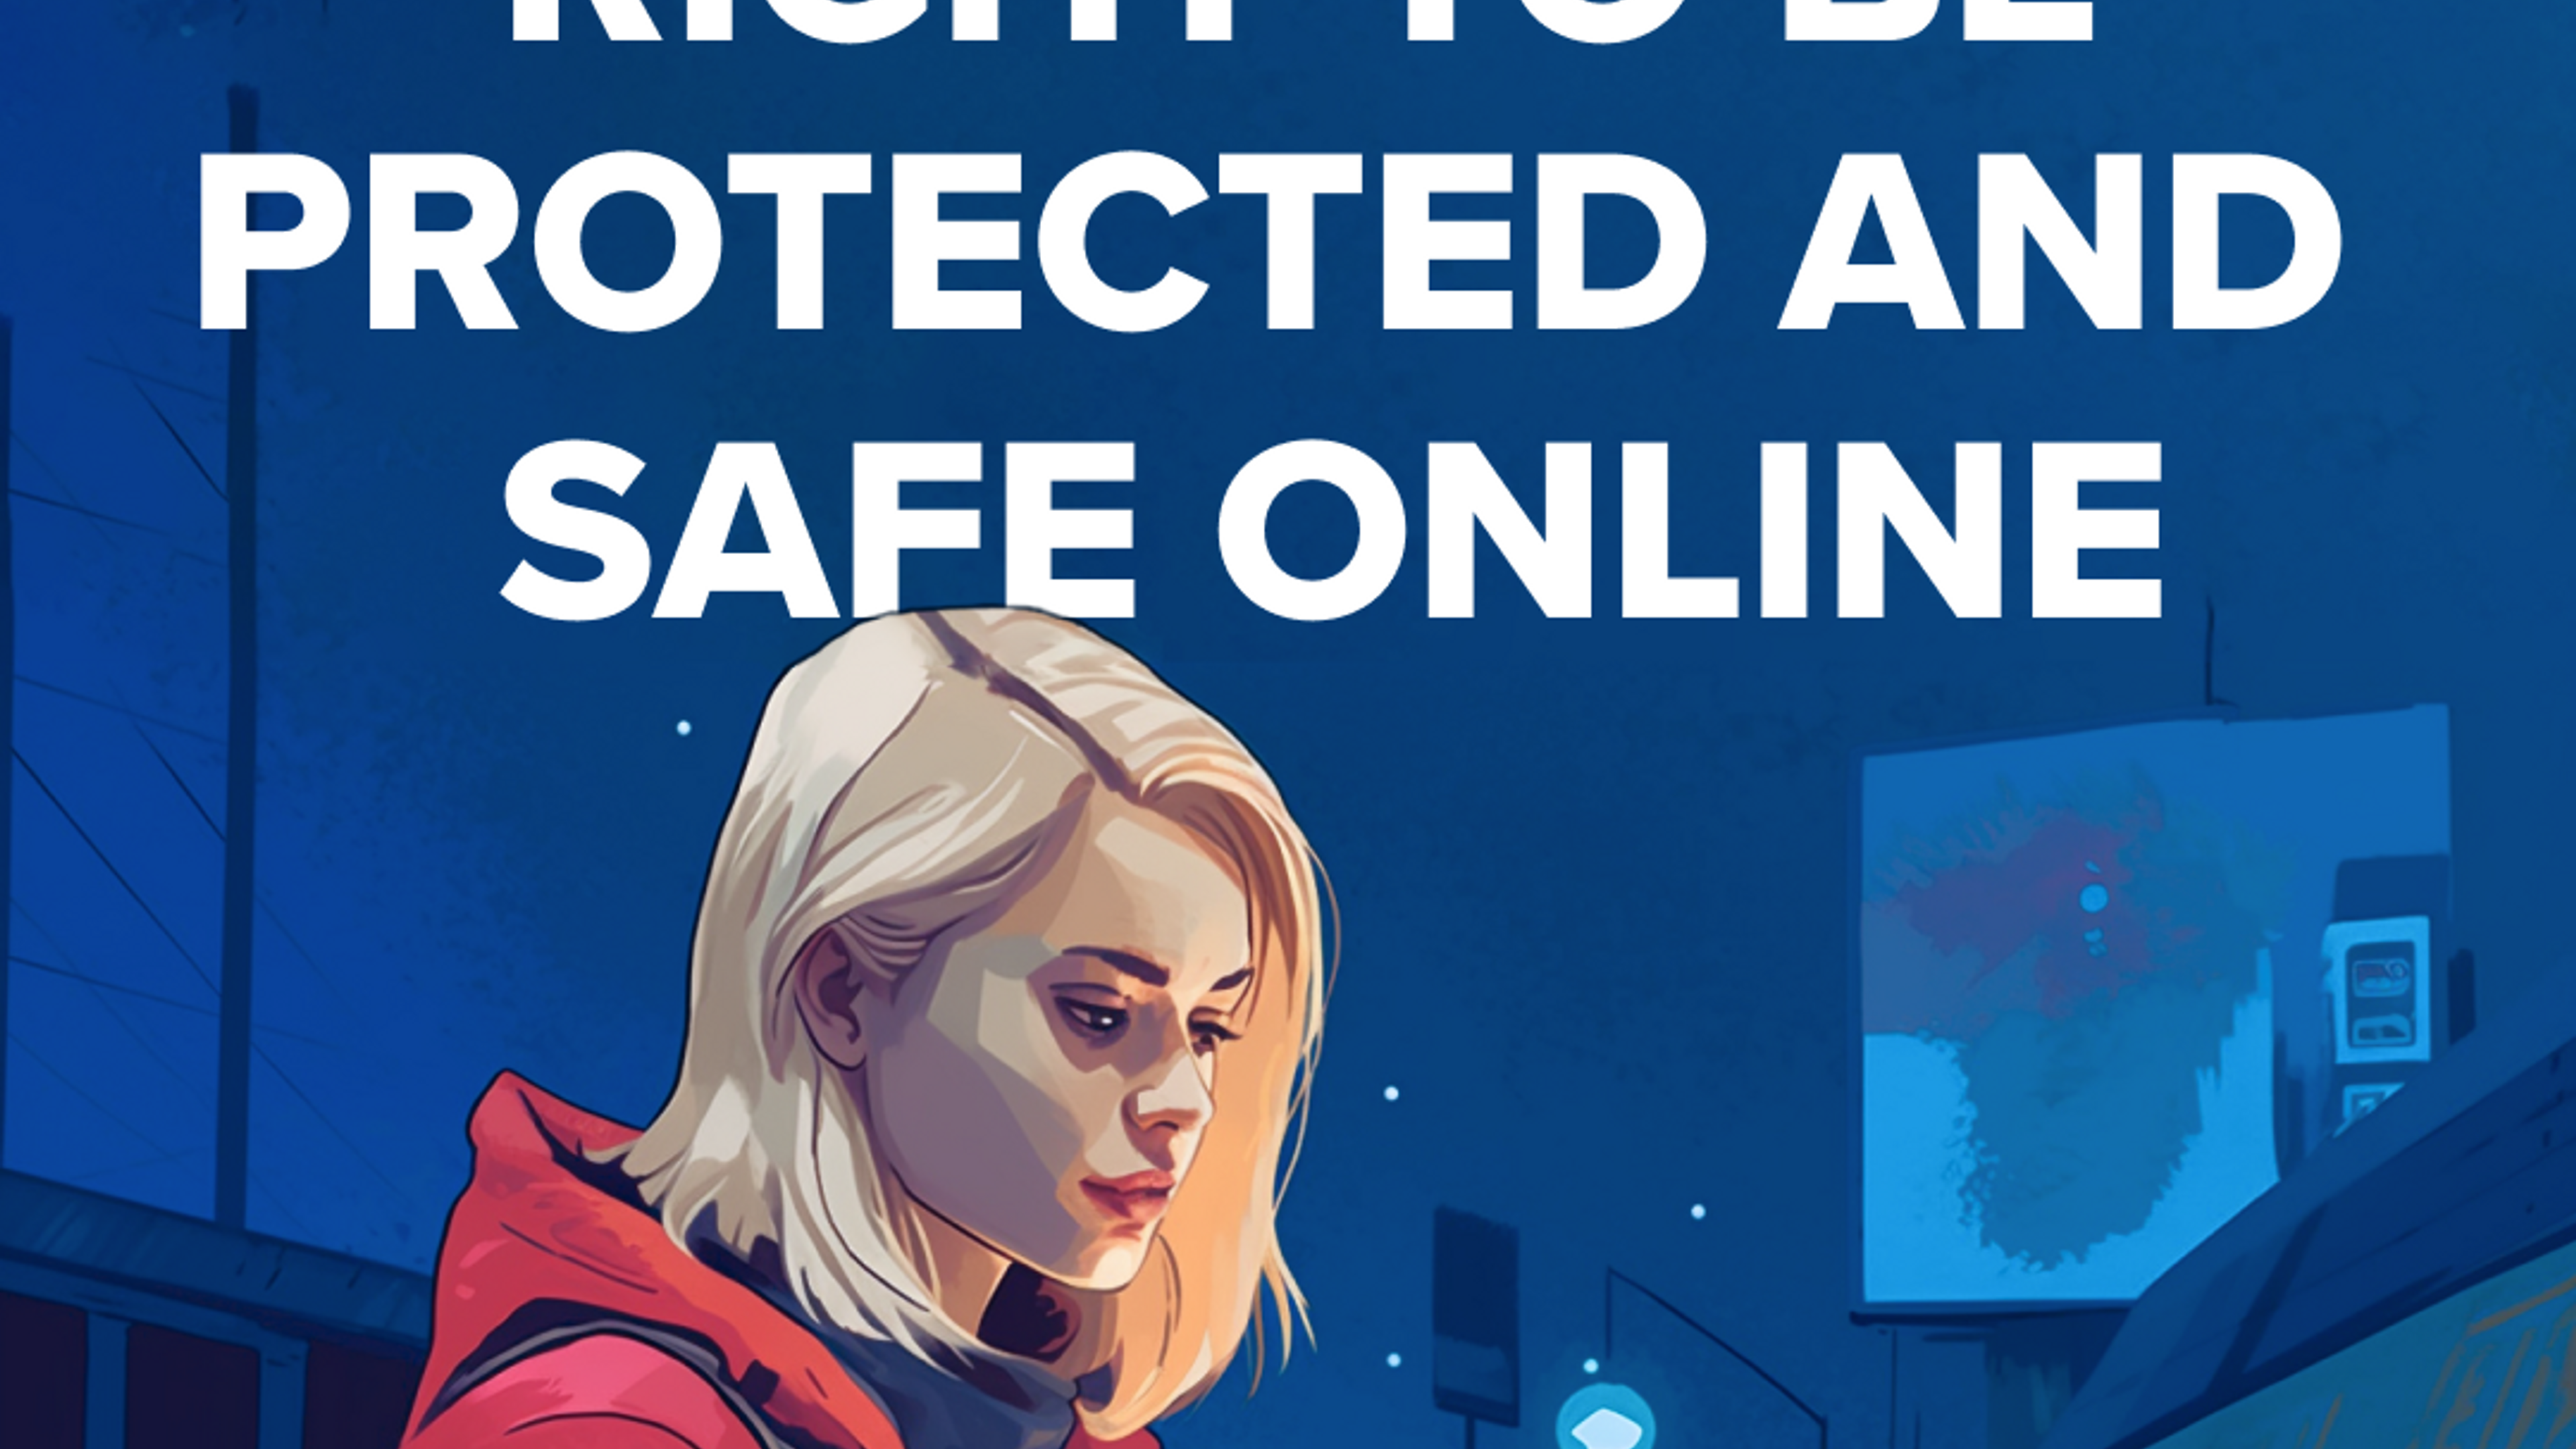 Illustration of young woman with a smartphone, including the text "You have the right to be protected and safe online".